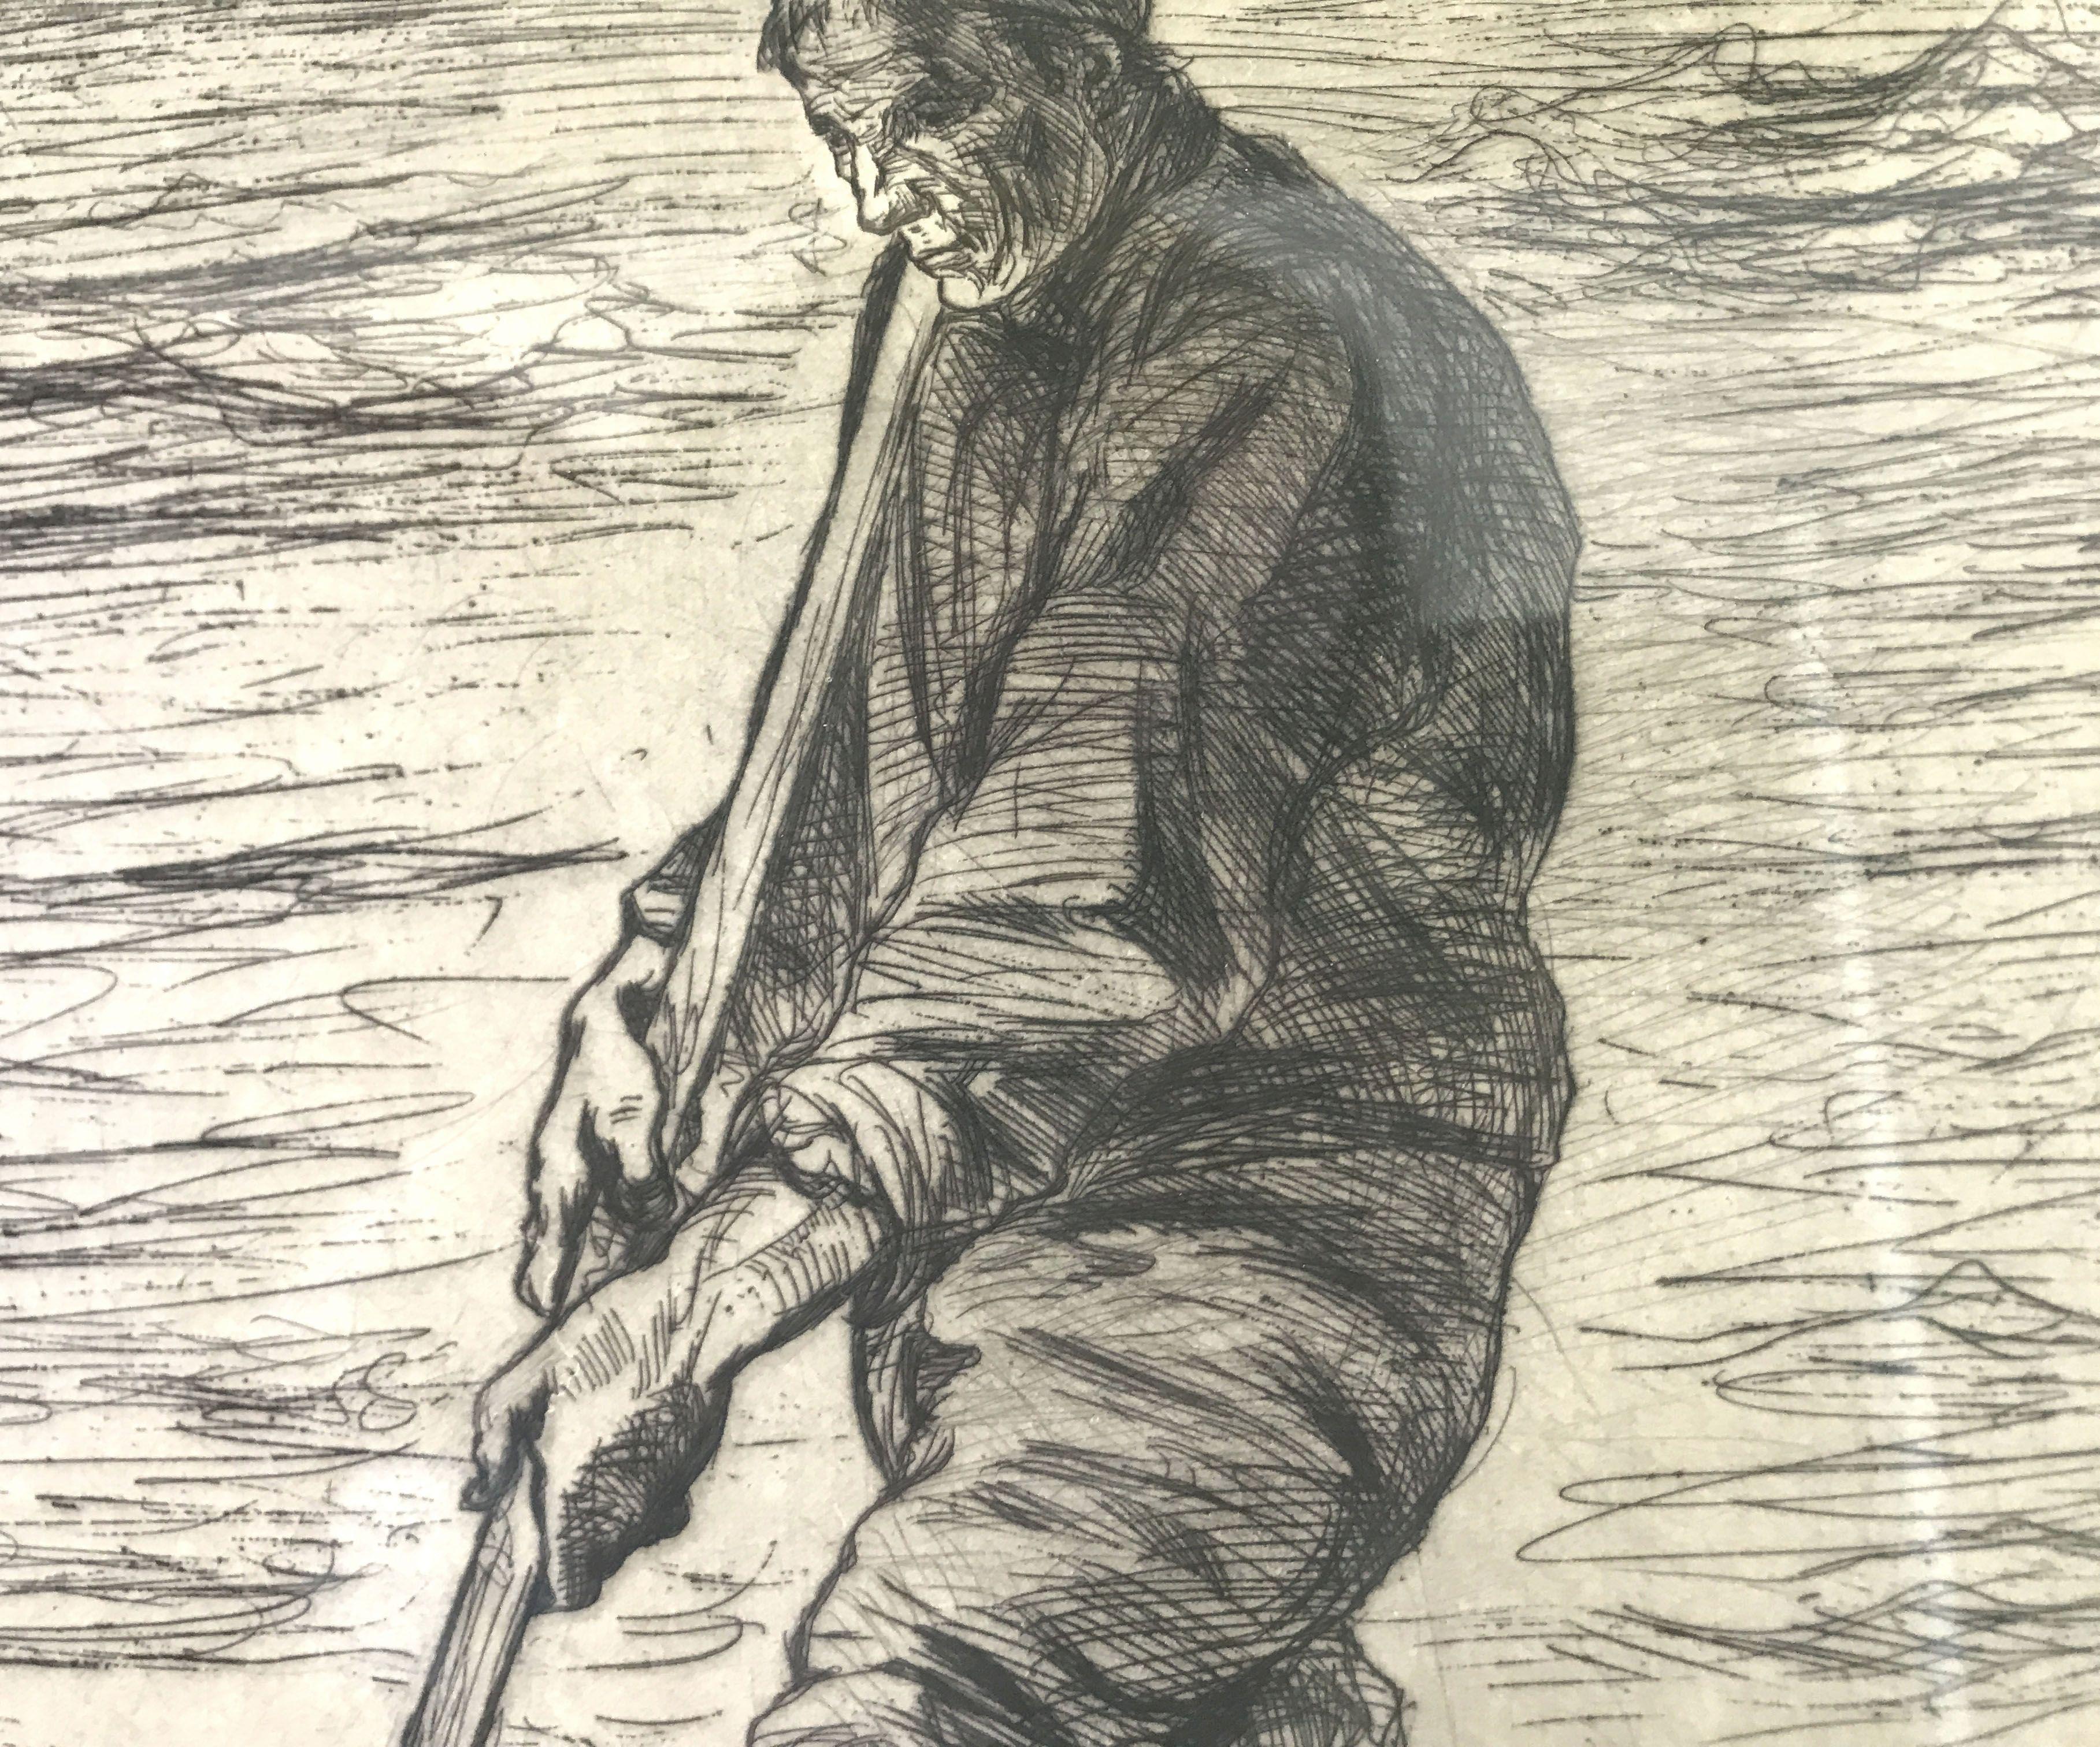 Listed Artist Jozef ISRAELS (1824-1911) "The Fisherman" Pencil Signed Etching